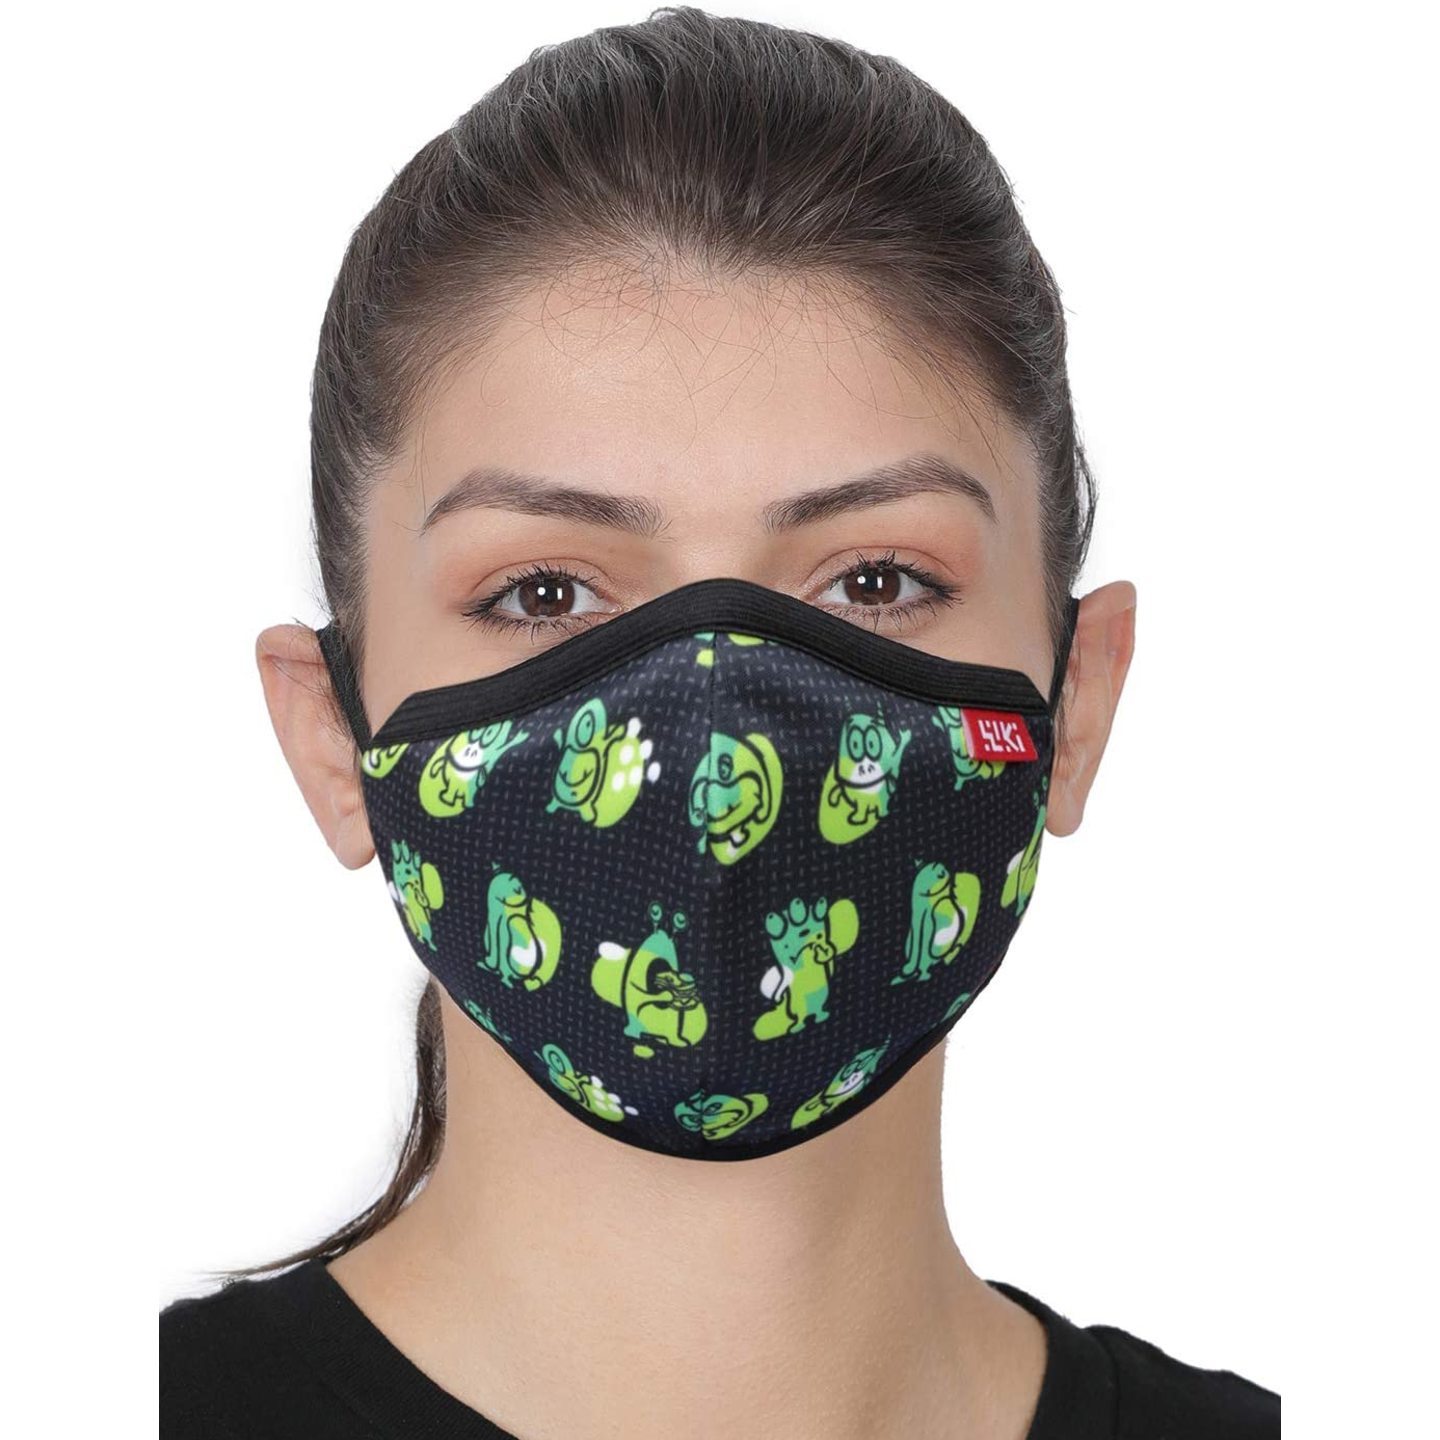 Wildcraft Wiki Champs Face Mask